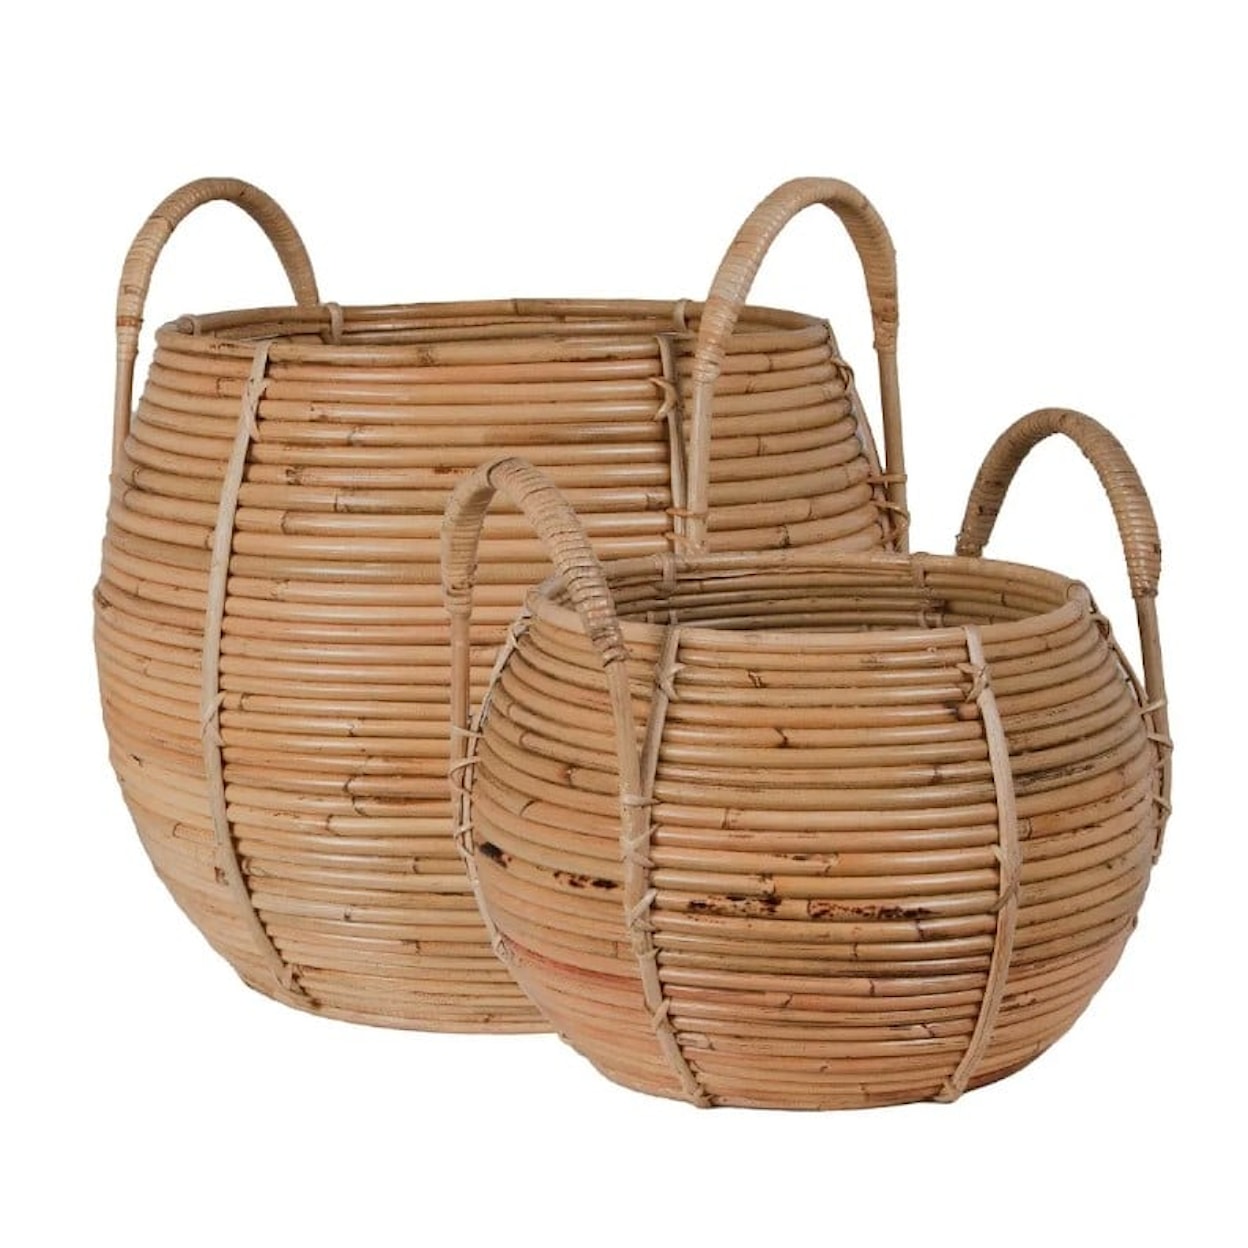 Ibolili Baskets and Sets THERMAL SPA RATTAN BELLY BASKET- S/2